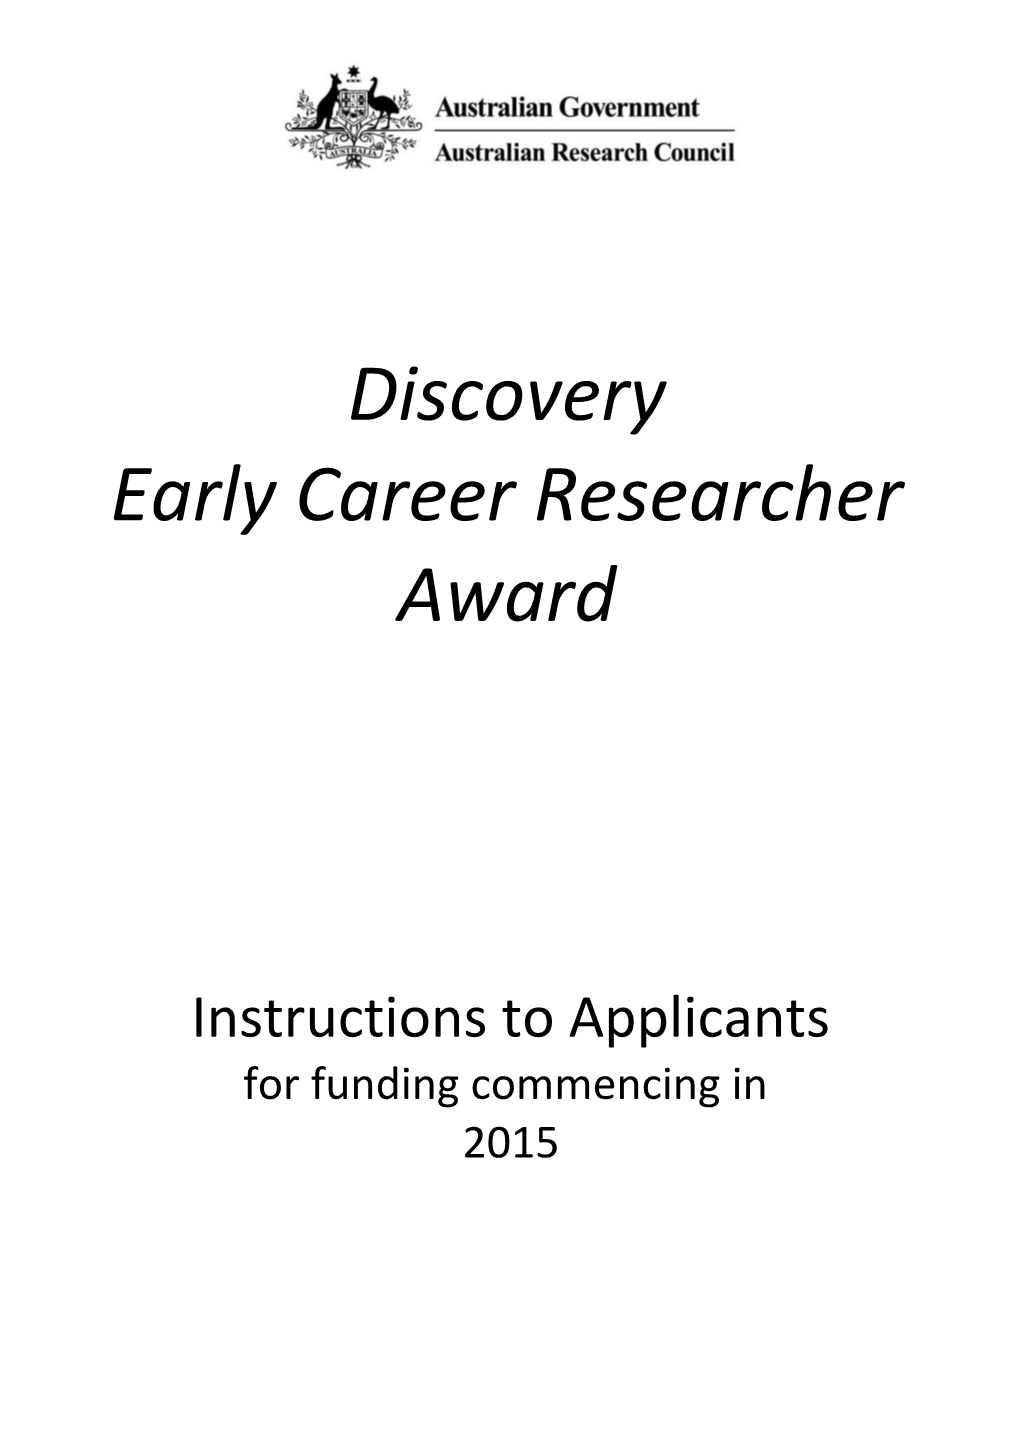 Discovery Early Career Researcher Awardfor Funding Commencing in 2015 - Instructions To